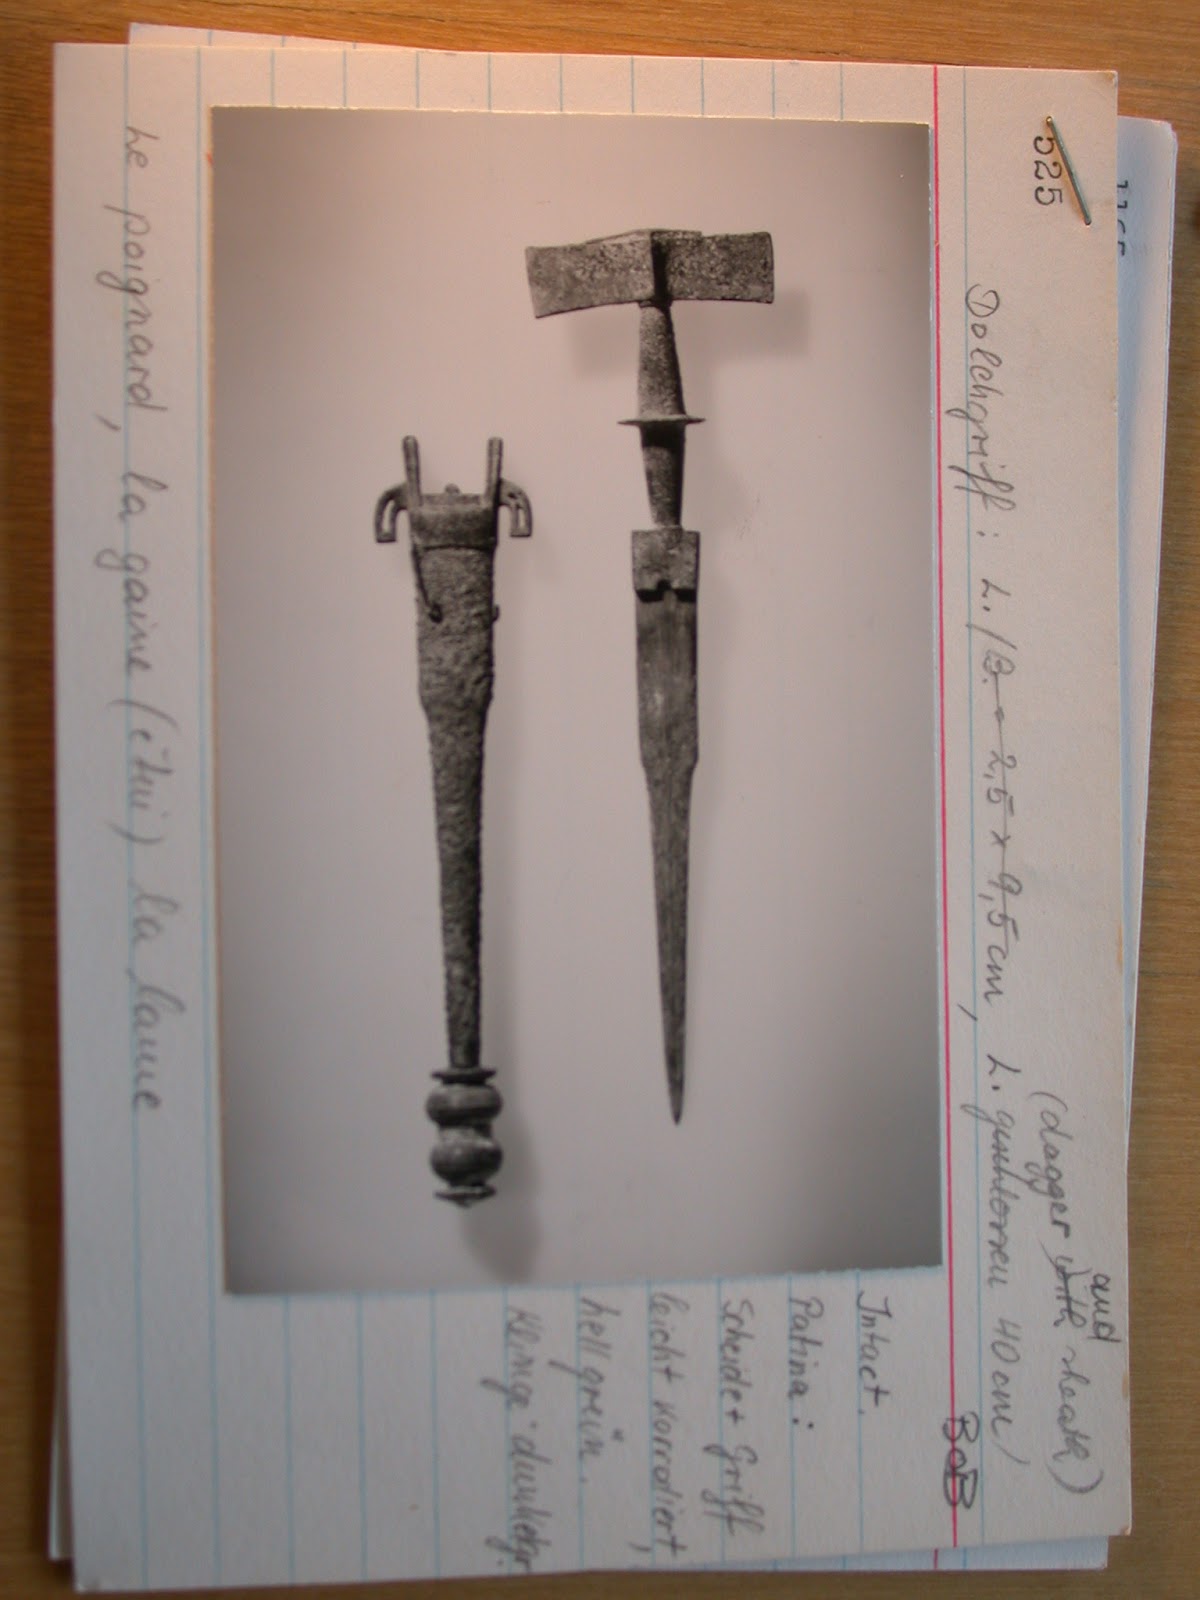 A photo of the bronze Celtic dagger and scabbard withdrawn from Christies's fromt the archives of Gianfranco Becchina, an Italian dealer convicted of selling illegally obtained antiquities. Photo: courtesy ARCA.